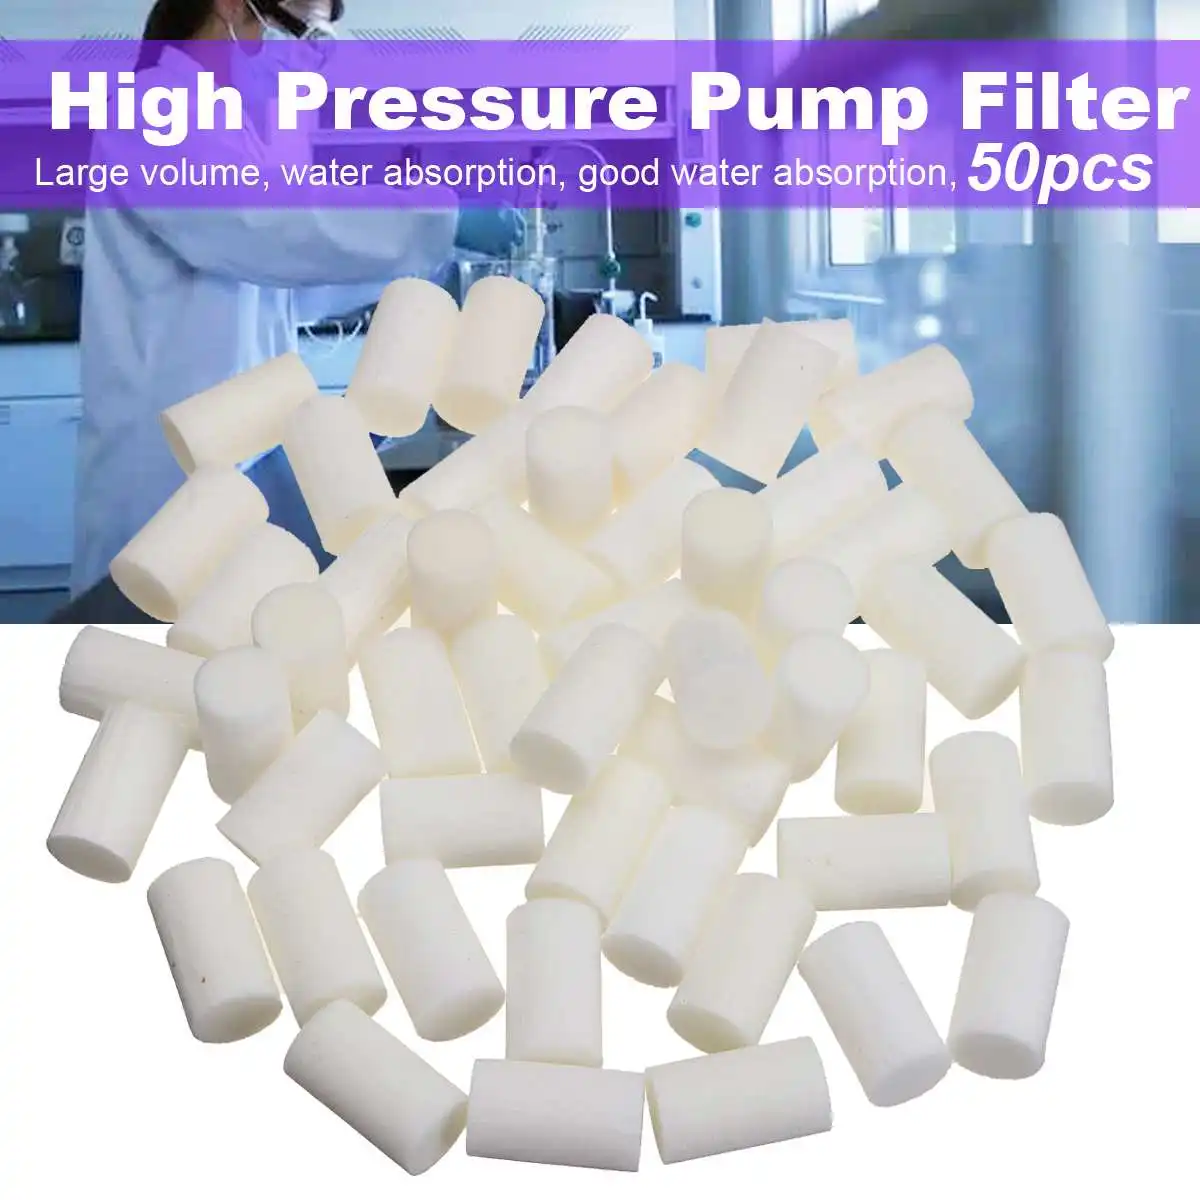 

New 50pcs High Pressure Pump Filter Element Refill 30MPa 35*20mm White Fiber Cotton Filters For Air Compressor System